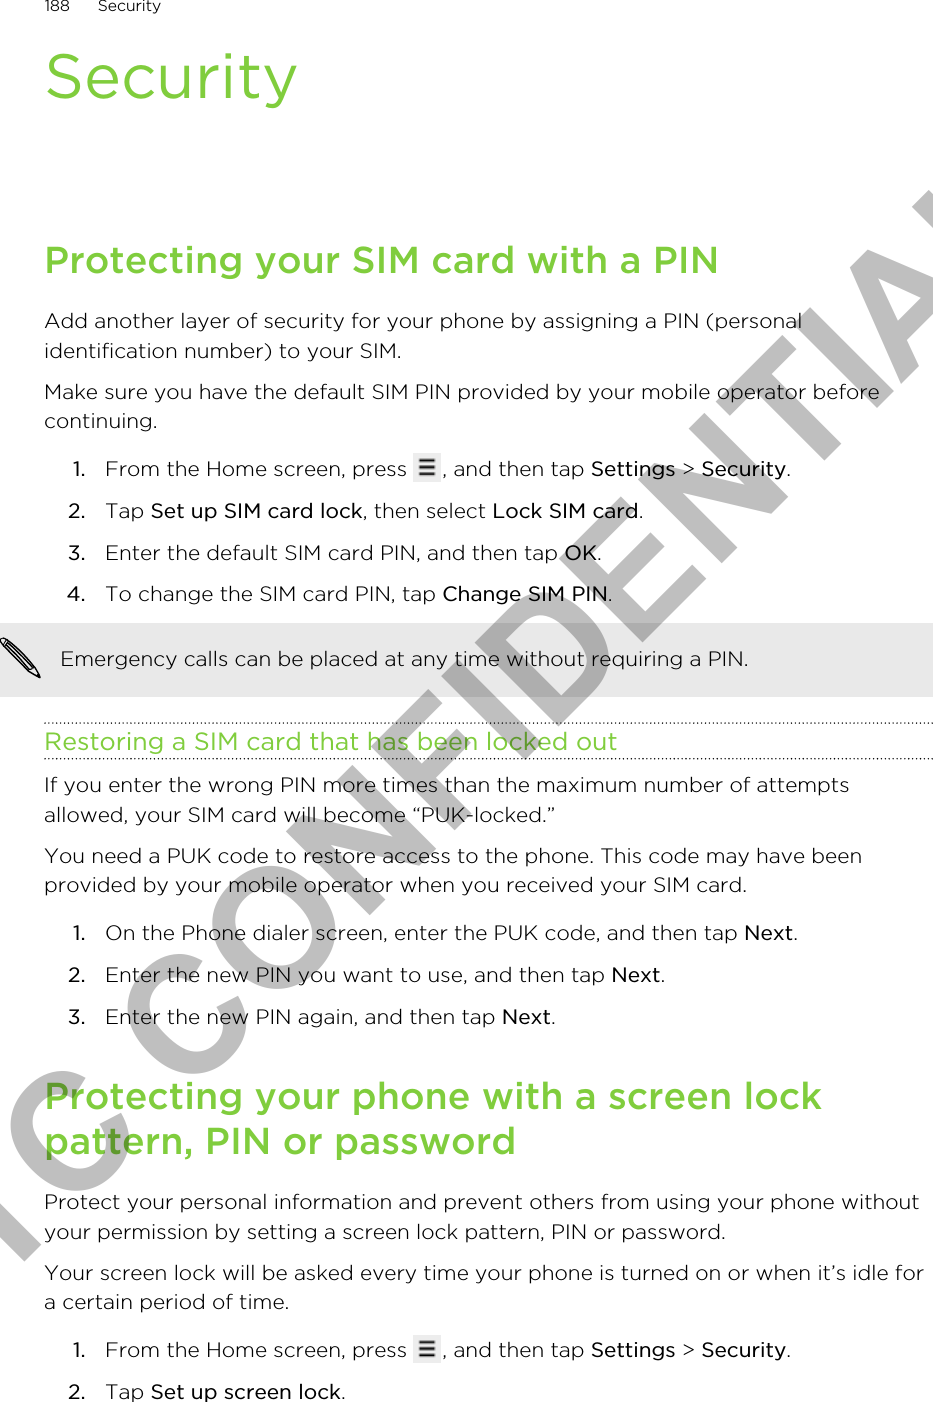 SecurityProtecting your SIM card with a PINAdd another layer of security for your phone by assigning a PIN (personalidentification number) to your SIM.Make sure you have the default SIM PIN provided by your mobile operator beforecontinuing.1. From the Home screen, press  , and then tap Settings &gt; Security.2. Tap Set up SIM card lock, then select Lock SIM card.3. Enter the default SIM card PIN, and then tap OK.4. To change the SIM card PIN, tap Change SIM PIN. Emergency calls can be placed at any time without requiring a PIN.Restoring a SIM card that has been locked outIf you enter the wrong PIN more times than the maximum number of attemptsallowed, your SIM card will become “PUK-locked.”You need a PUK code to restore access to the phone. This code may have beenprovided by your mobile operator when you received your SIM card.1. On the Phone dialer screen, enter the PUK code, and then tap Next.2. Enter the new PIN you want to use, and then tap Next.3. Enter the new PIN again, and then tap Next.Protecting your phone with a screen lockpattern, PIN or passwordProtect your personal information and prevent others from using your phone withoutyour permission by setting a screen lock pattern, PIN or password.Your screen lock will be asked every time your phone is turned on or when it’s idle fora certain period of time.1. From the Home screen, press  , and then tap Settings &gt; Security.2. Tap Set up screen lock.188 SecurityHTC CONFIDENTIAL